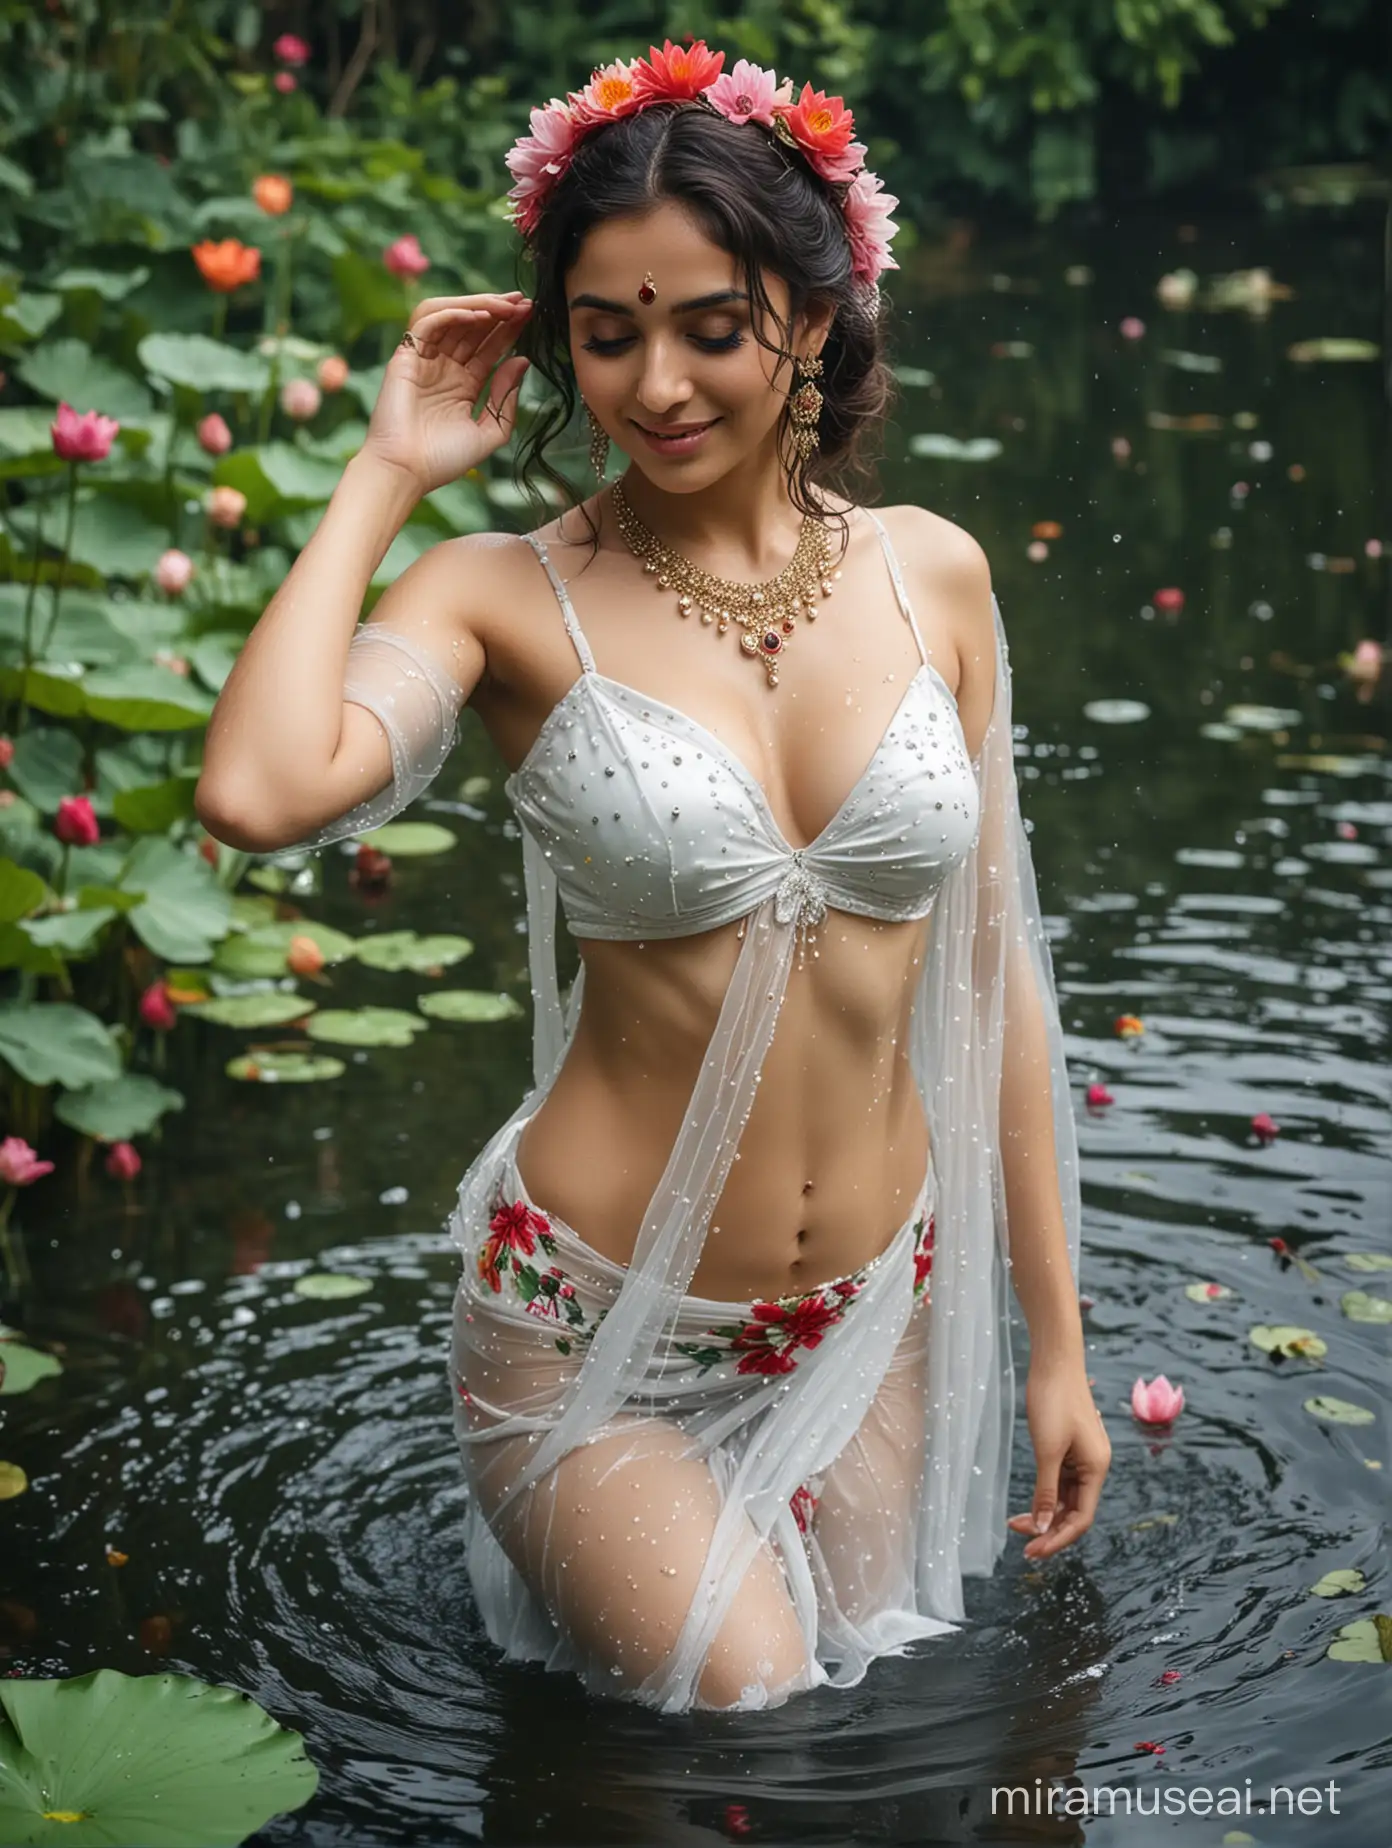 full body view  most beautiful european girl as beautiful white matured  indian bride, wide big eyes, bright full face, bathing in pond, turned away showing back, full body drenched with  water, elegant wet  saree look, backless,   full body jewelry, ornaments, drenched fully with water droplets, drenched transparent saree,  long curly hairs, raised brows, innocent and shy, closeup, 
 looking back over shoulders stylishly with innocence and shy  modest smile, red dot, necklace, one hand raised to show innocence  and armpit,   adorned with multicolor flowers, drenched  hairs and breast cloth, no bra straps, visible  up tp thighs,  big long bathing pool for bathing, lush green plants, pond full of water,  lotus flowers, clear blue crystal clear  transparent water,    lotus flowers, VIBRANT COLORS, intricate details, photo realistic, 8k.